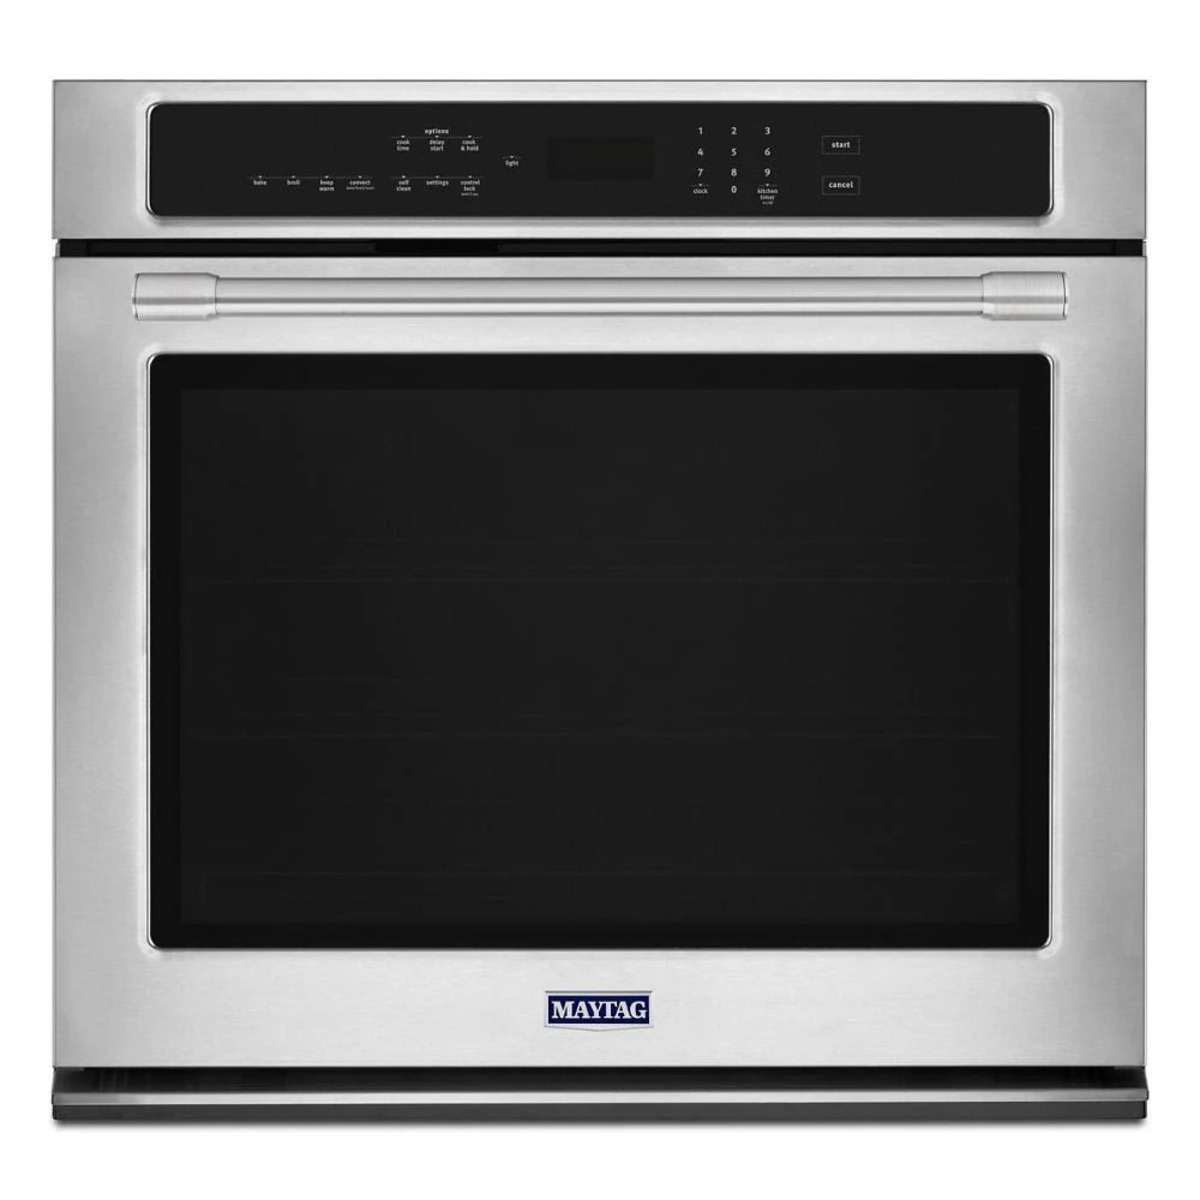 How To Fix The Error Code F5-E3 For Maytag Oven